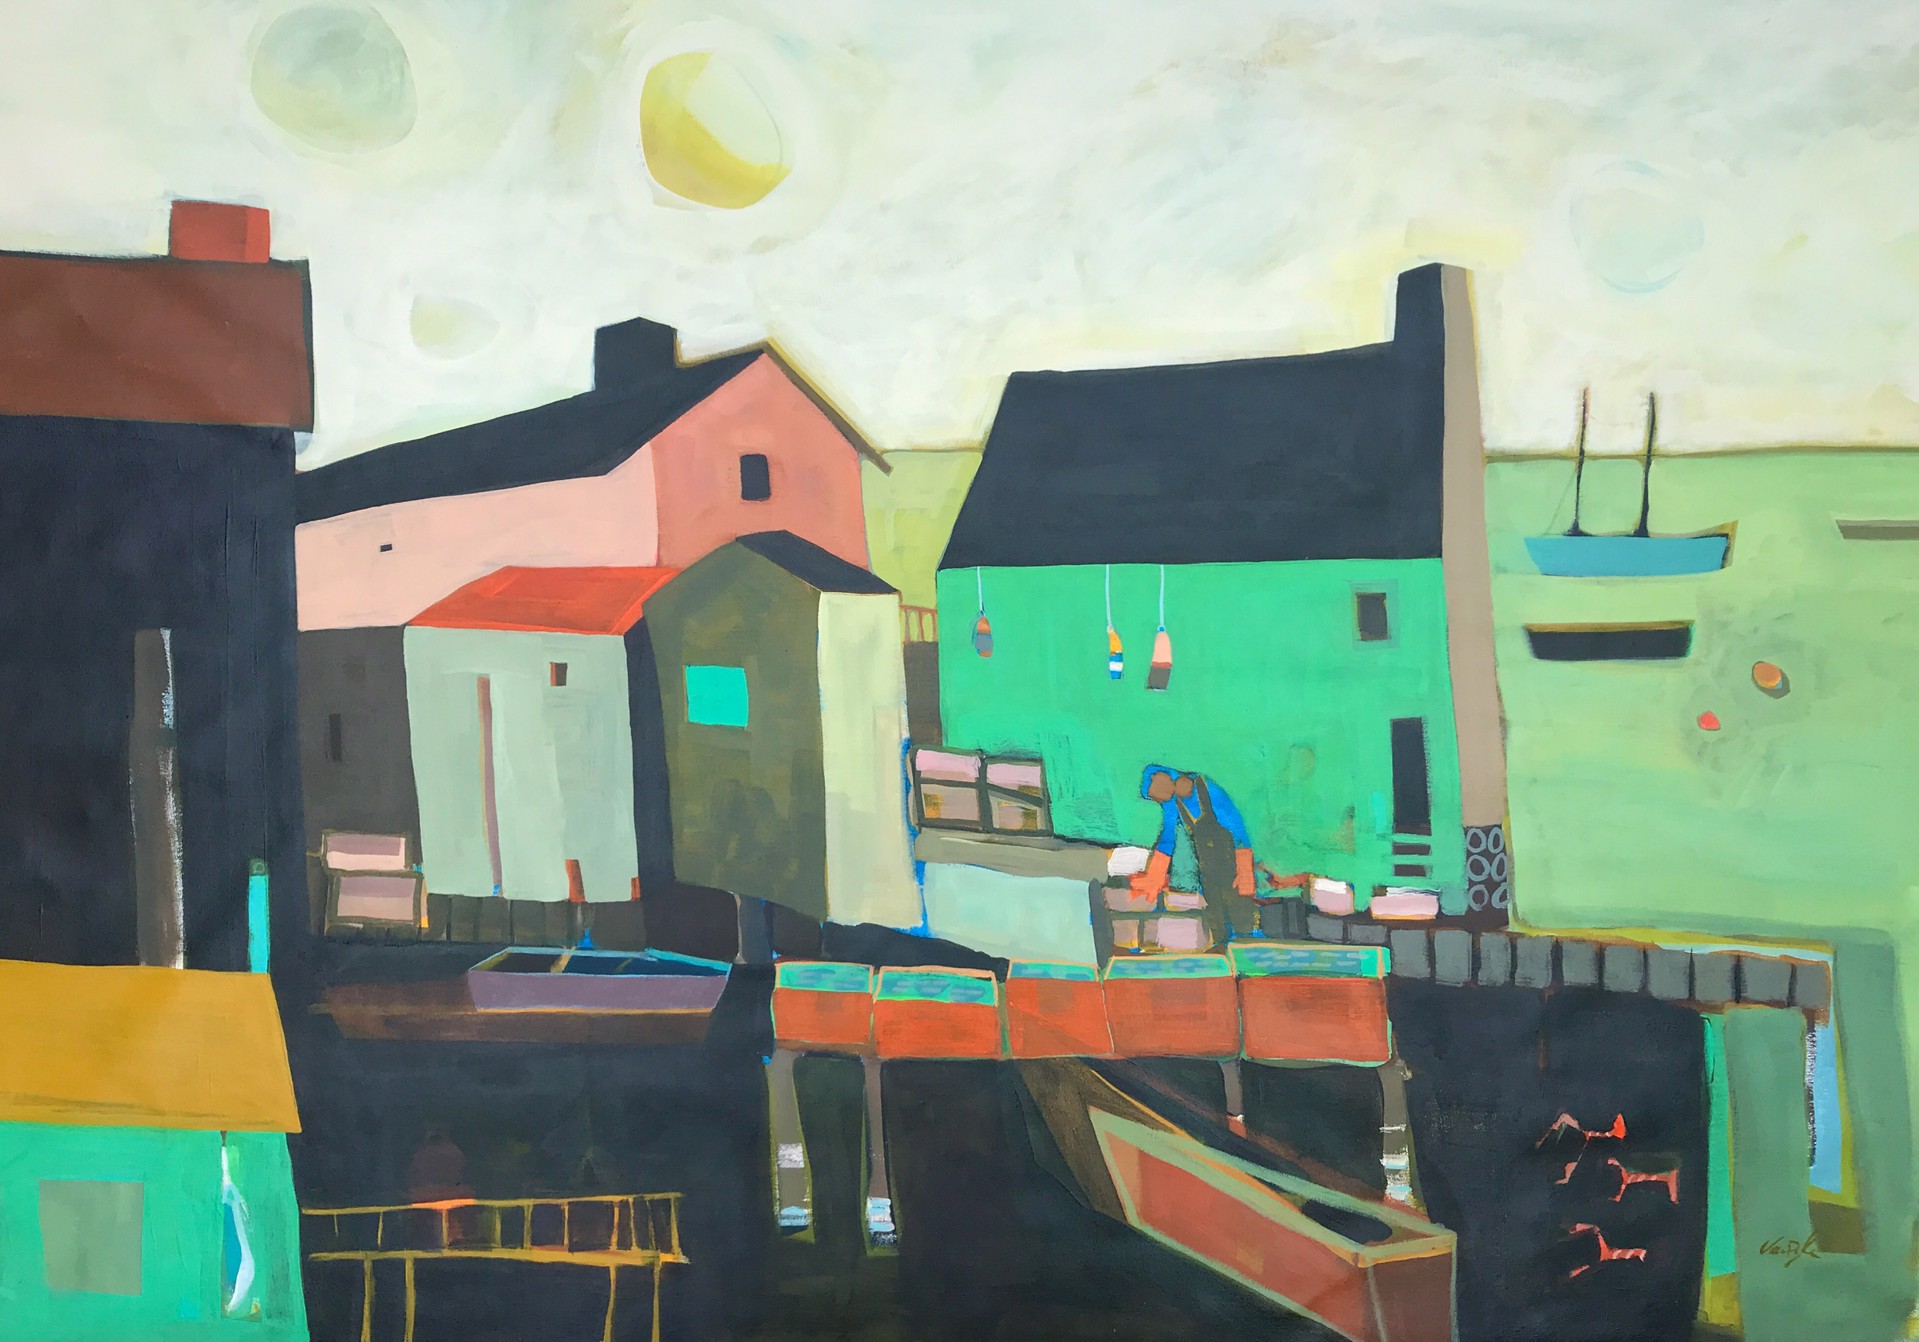 Wharf worker, docks and fish trays with salted herring by Rachael Van Dyke